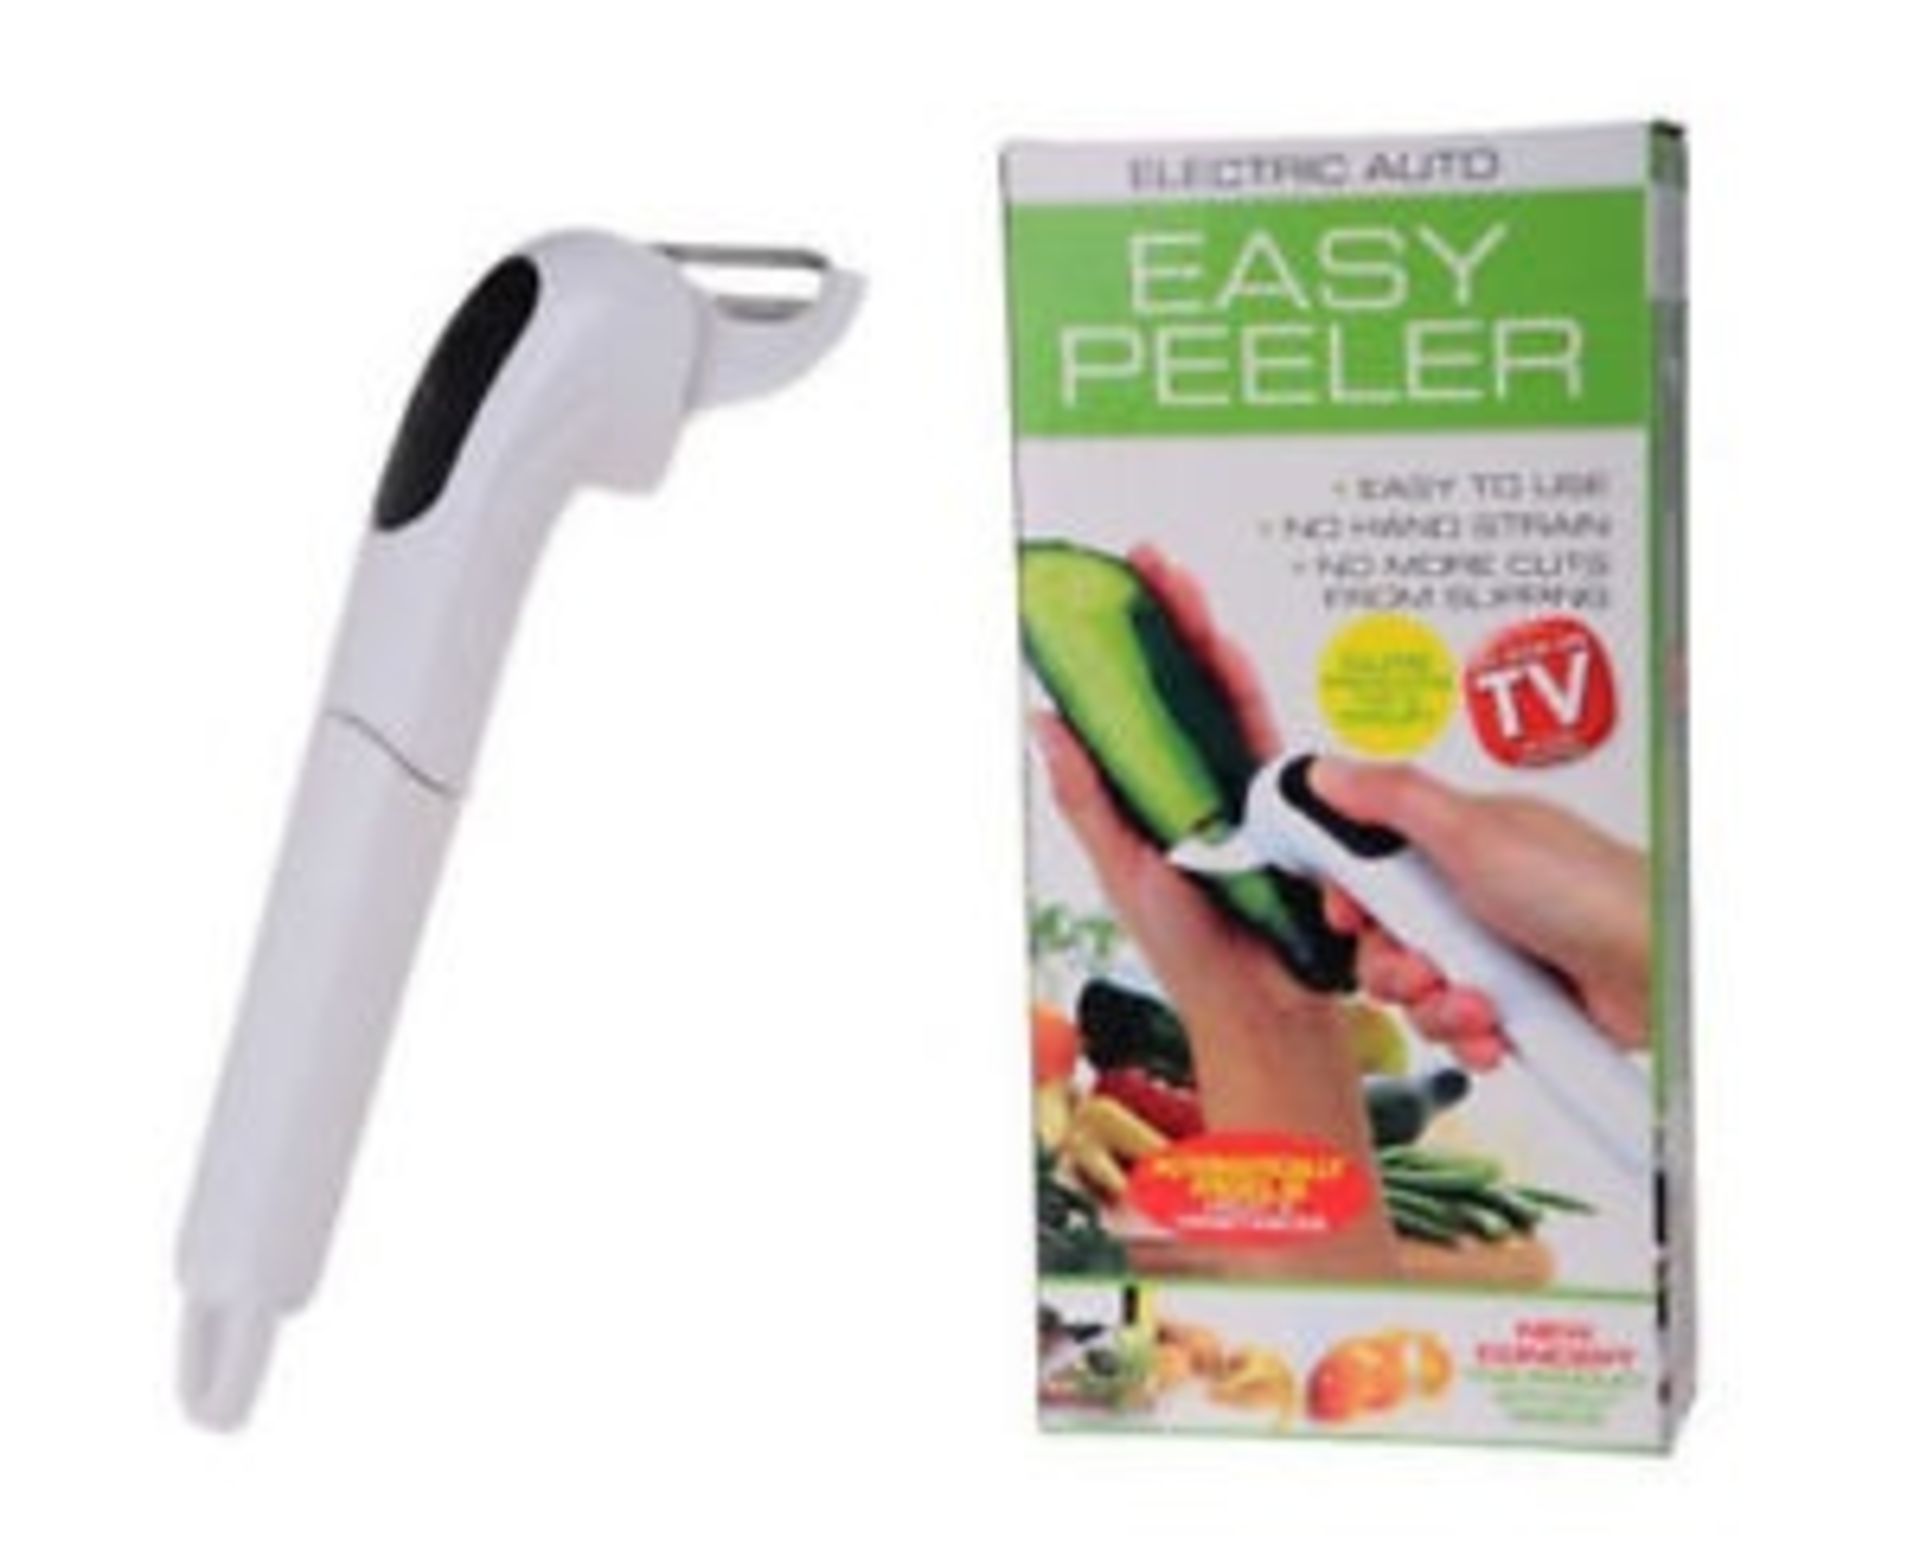 V Brand New Electric Easy Peeler - AS SEEN ON TV - Cuts Preparation Time In Half